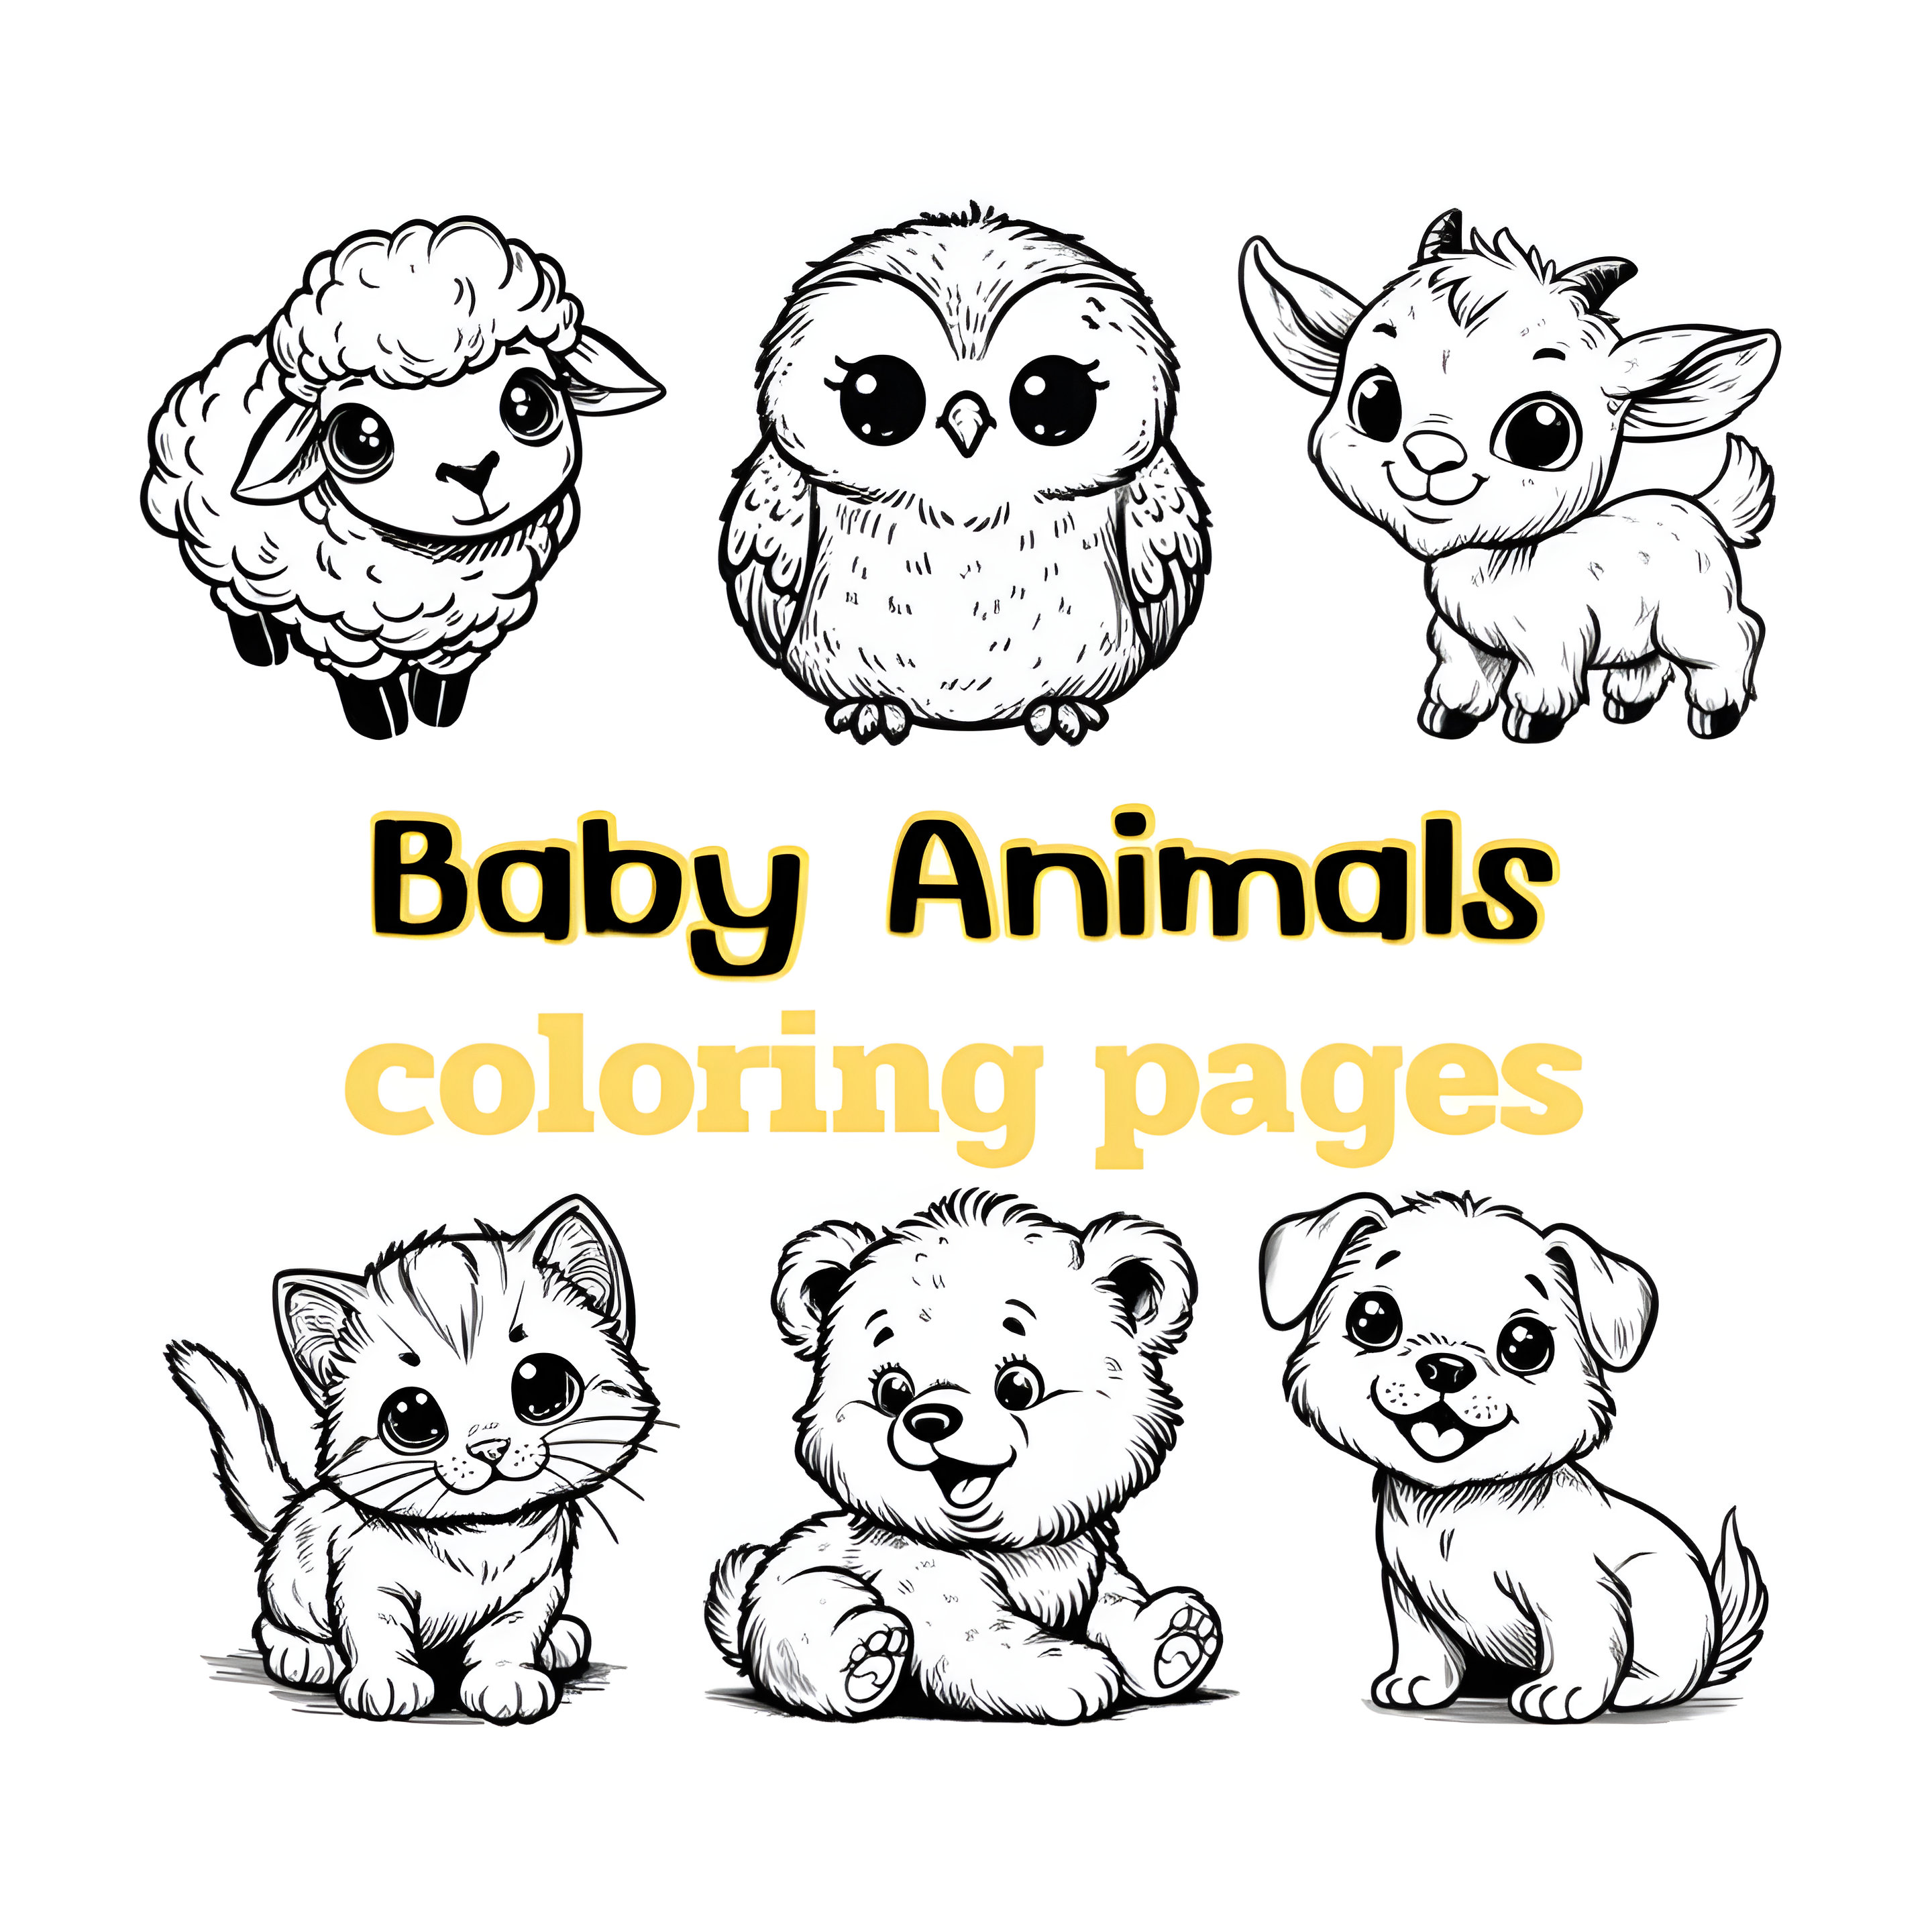 Baby animals coloring pages